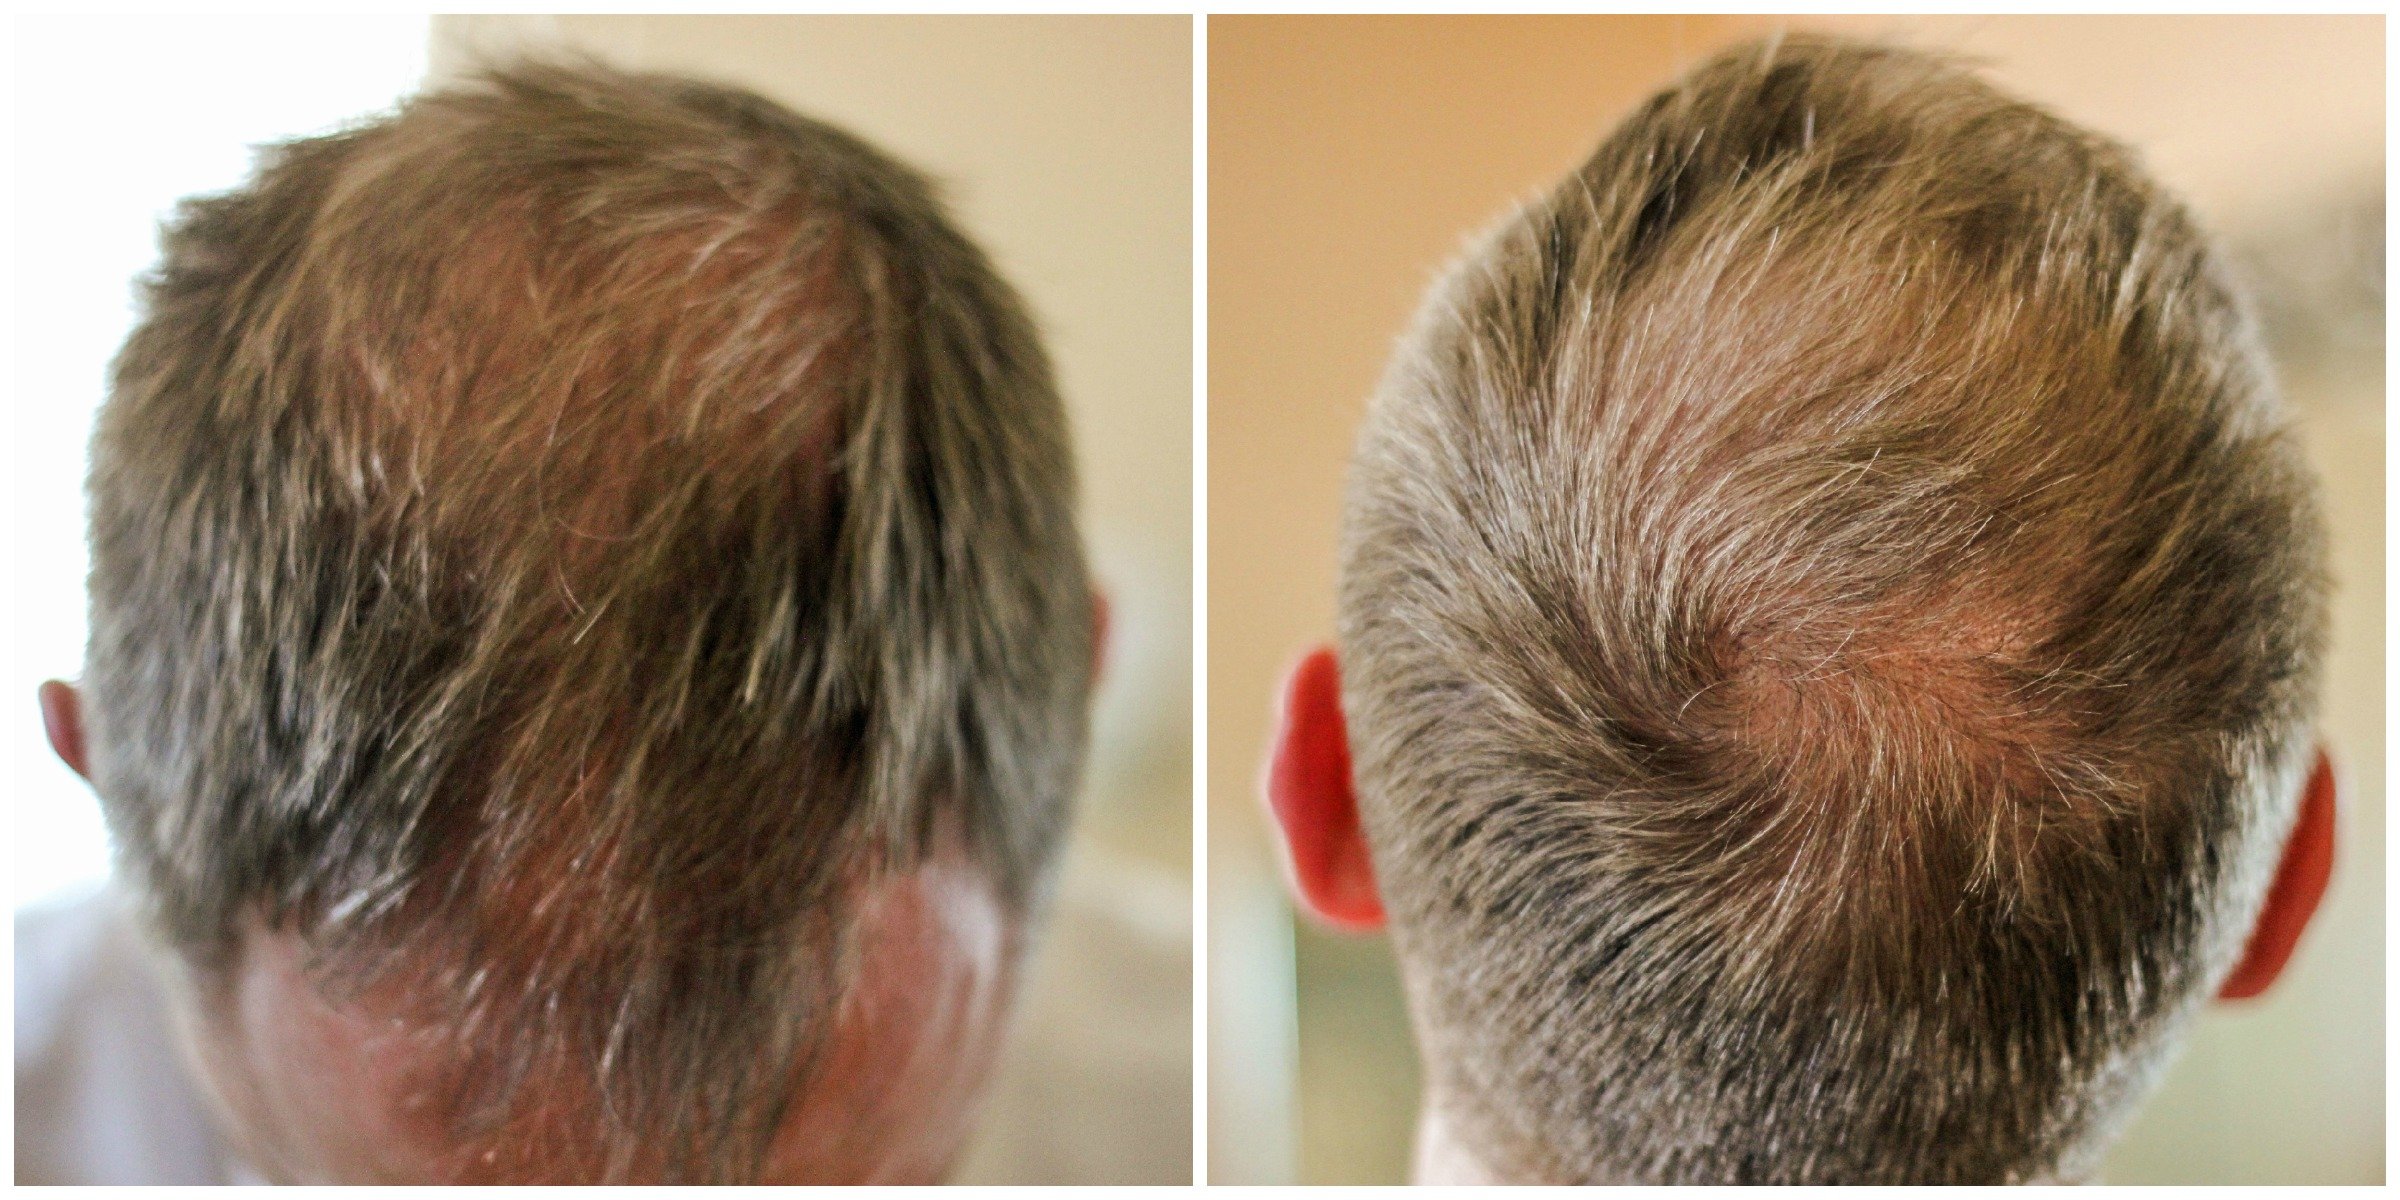 Hair Thinning and Hair Loss: What